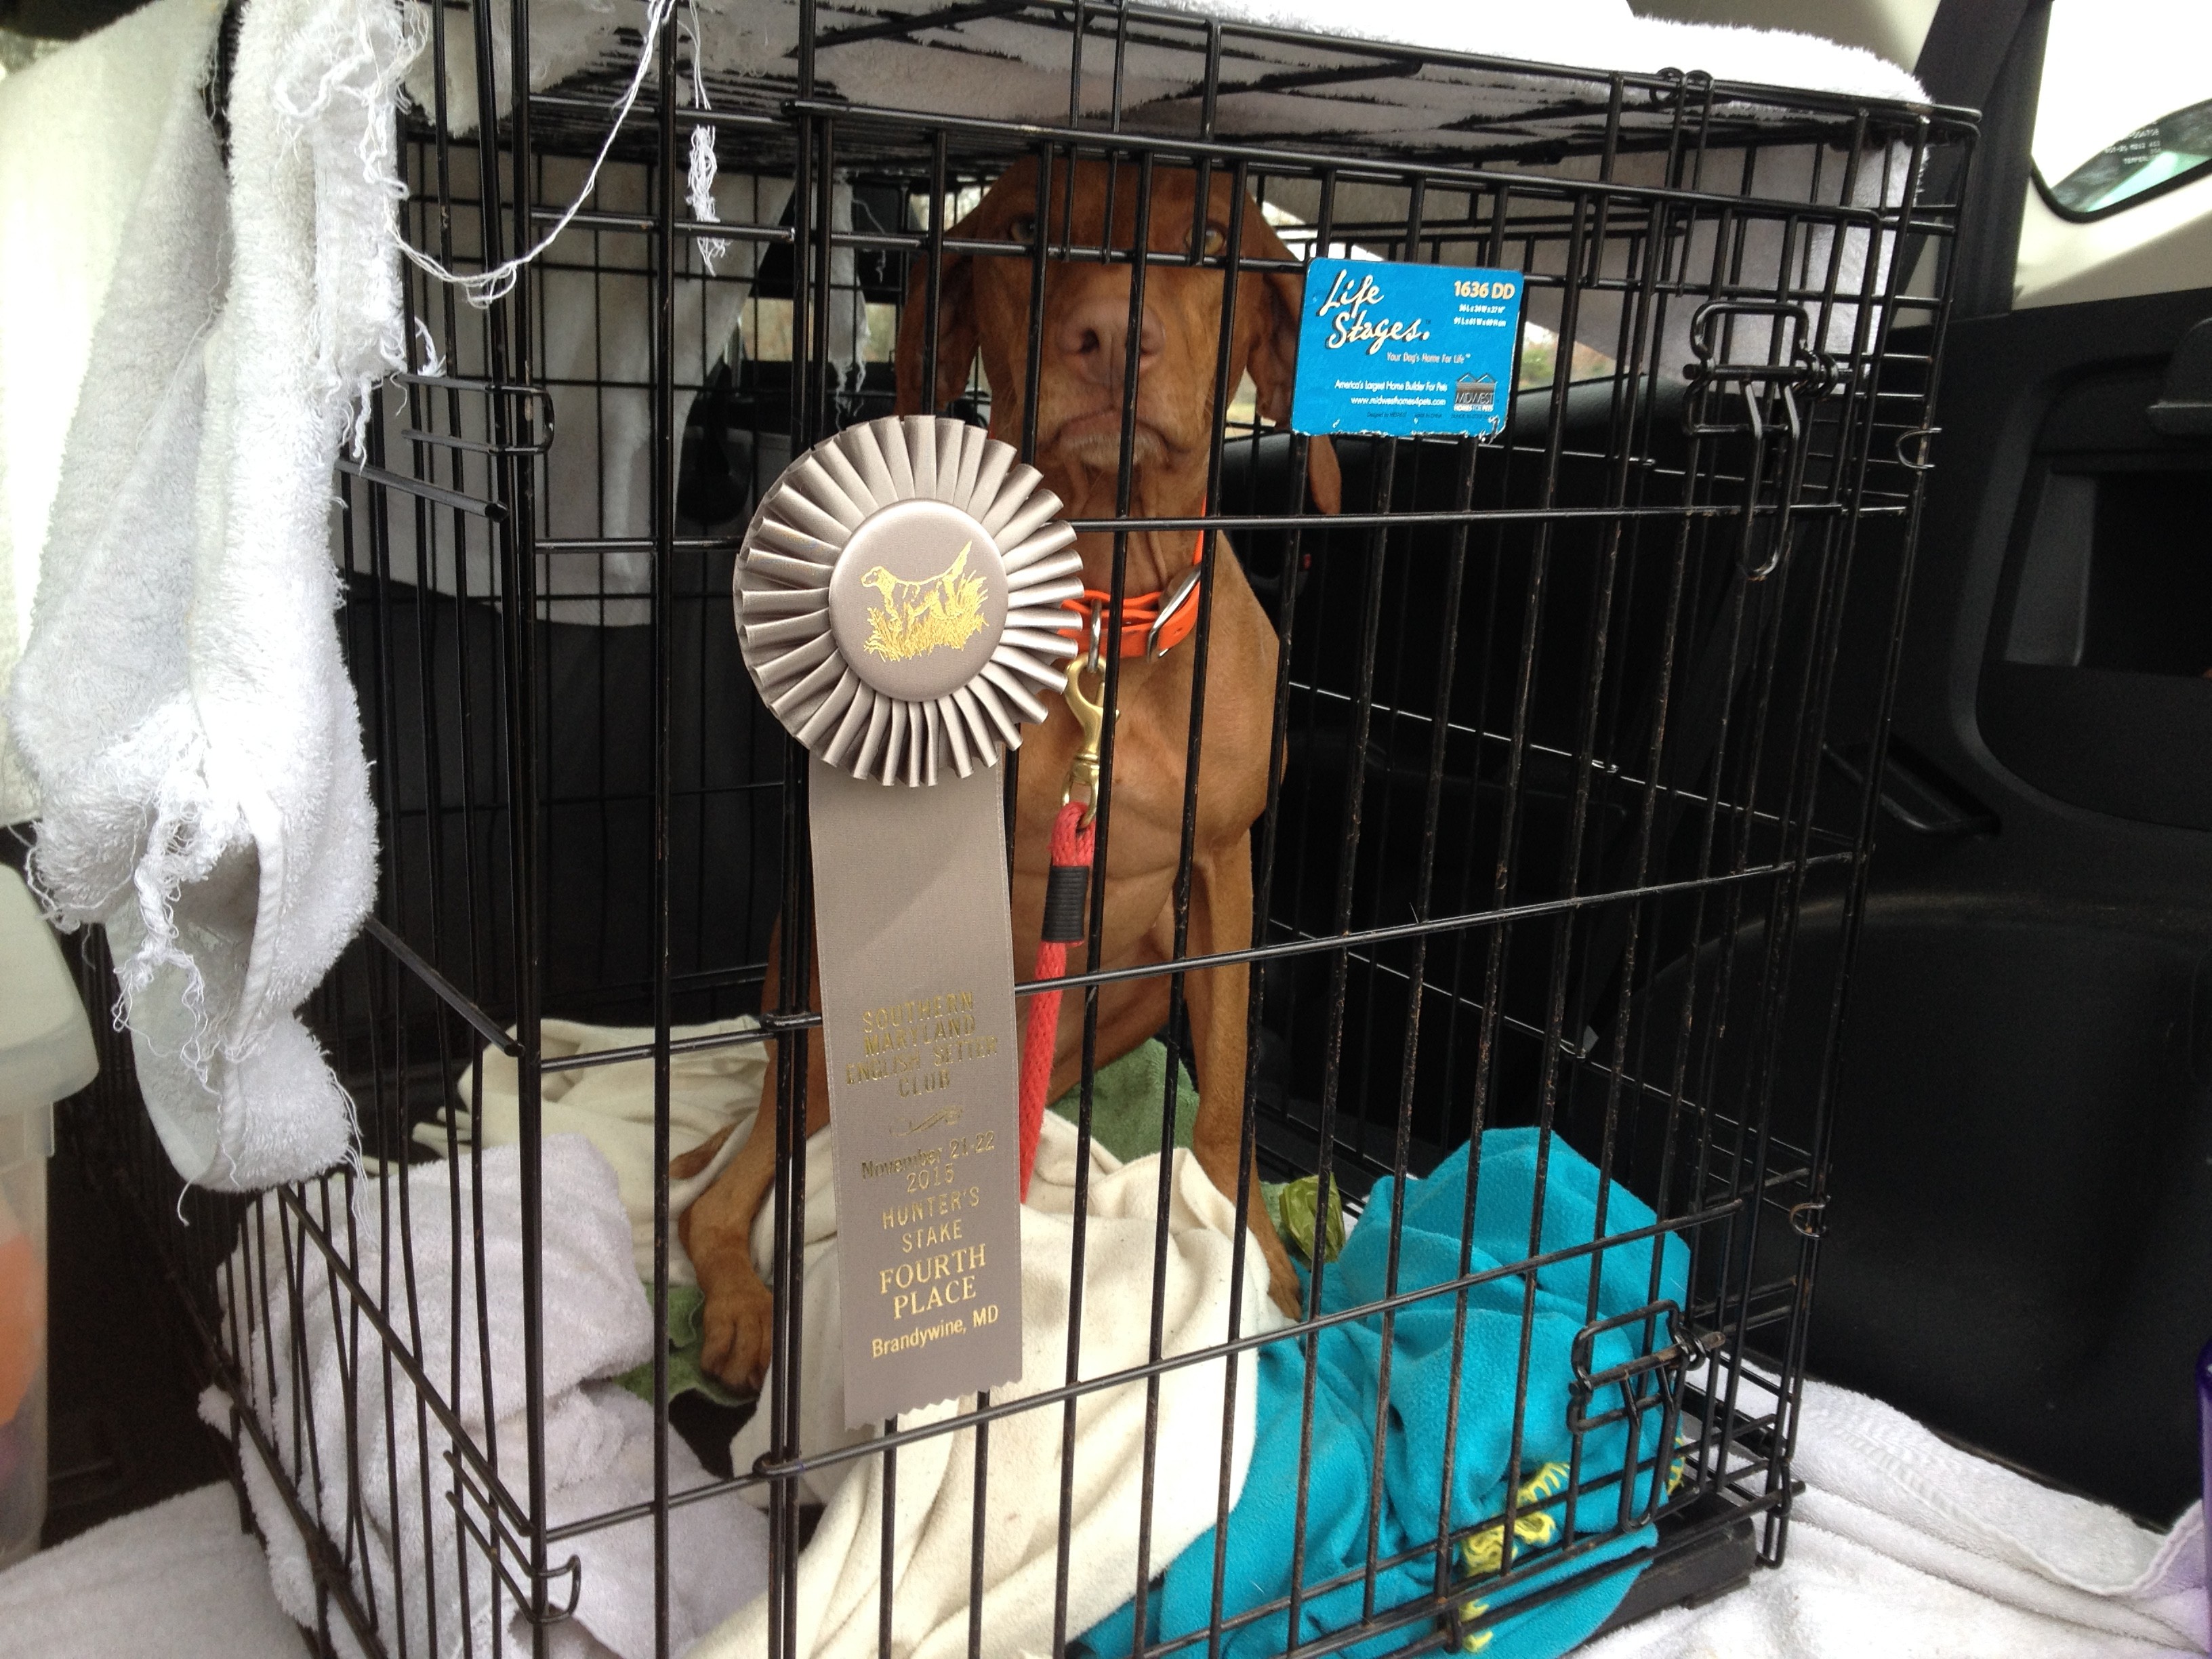 I won a ribbon! Now get me out of this crate.